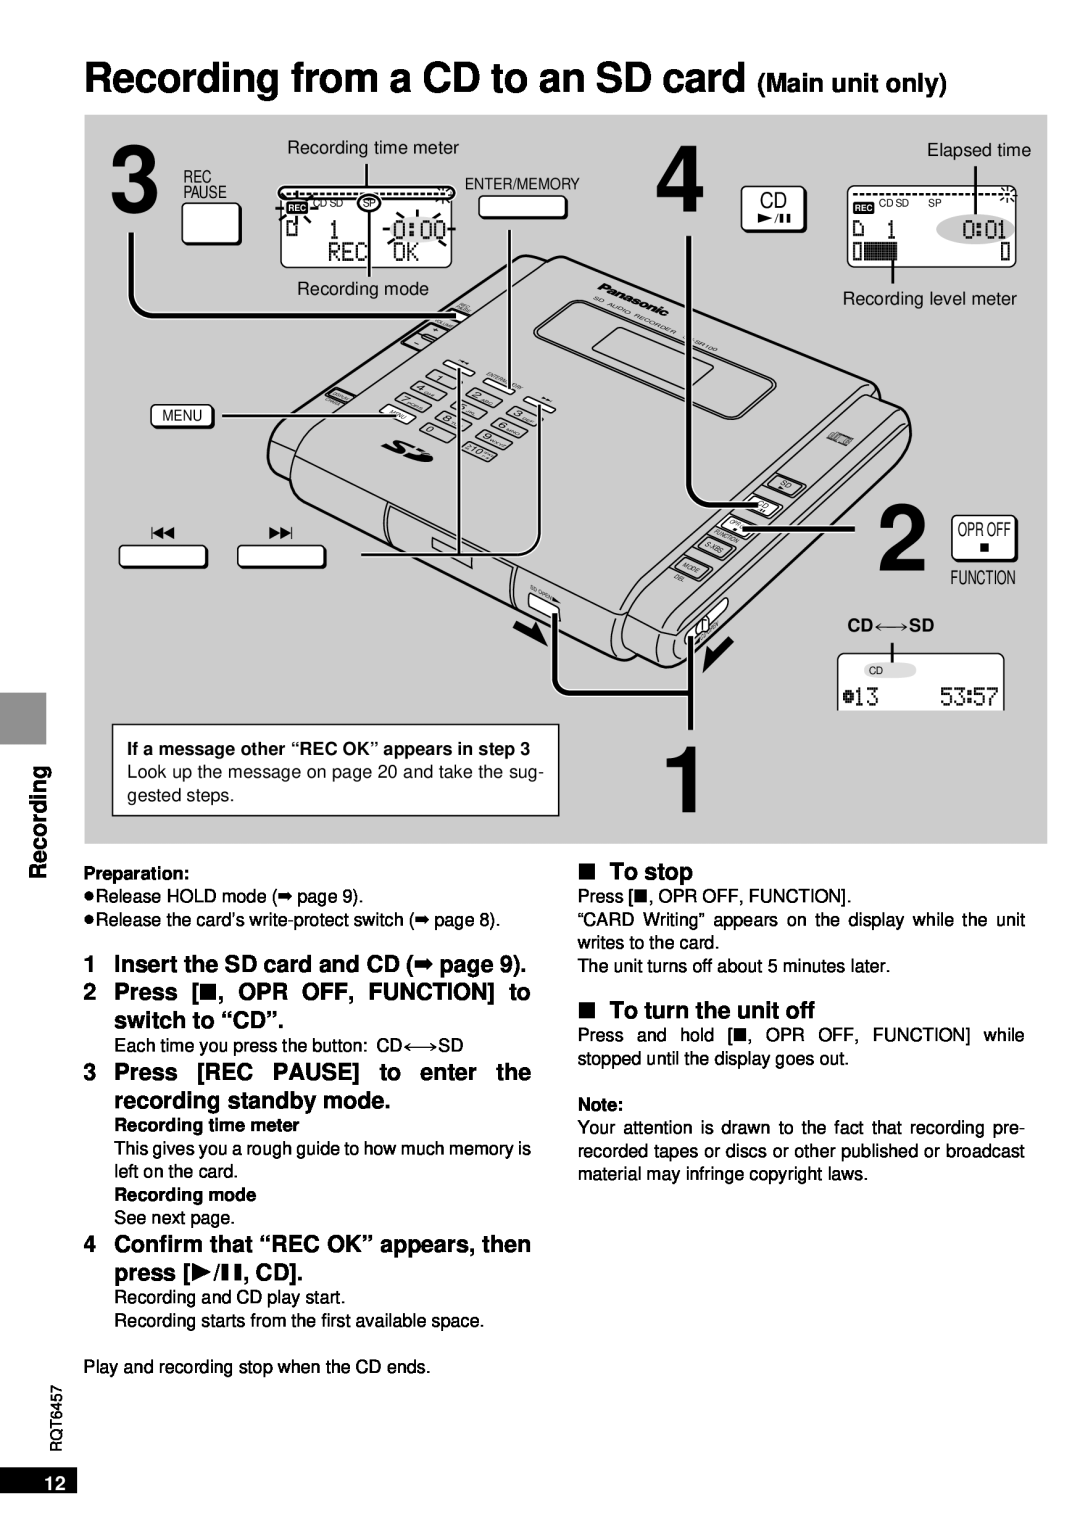 Panasonic SV-SR100 operating instructions Recording from a CD to an SD card Main unit only, Opr Off, Function 